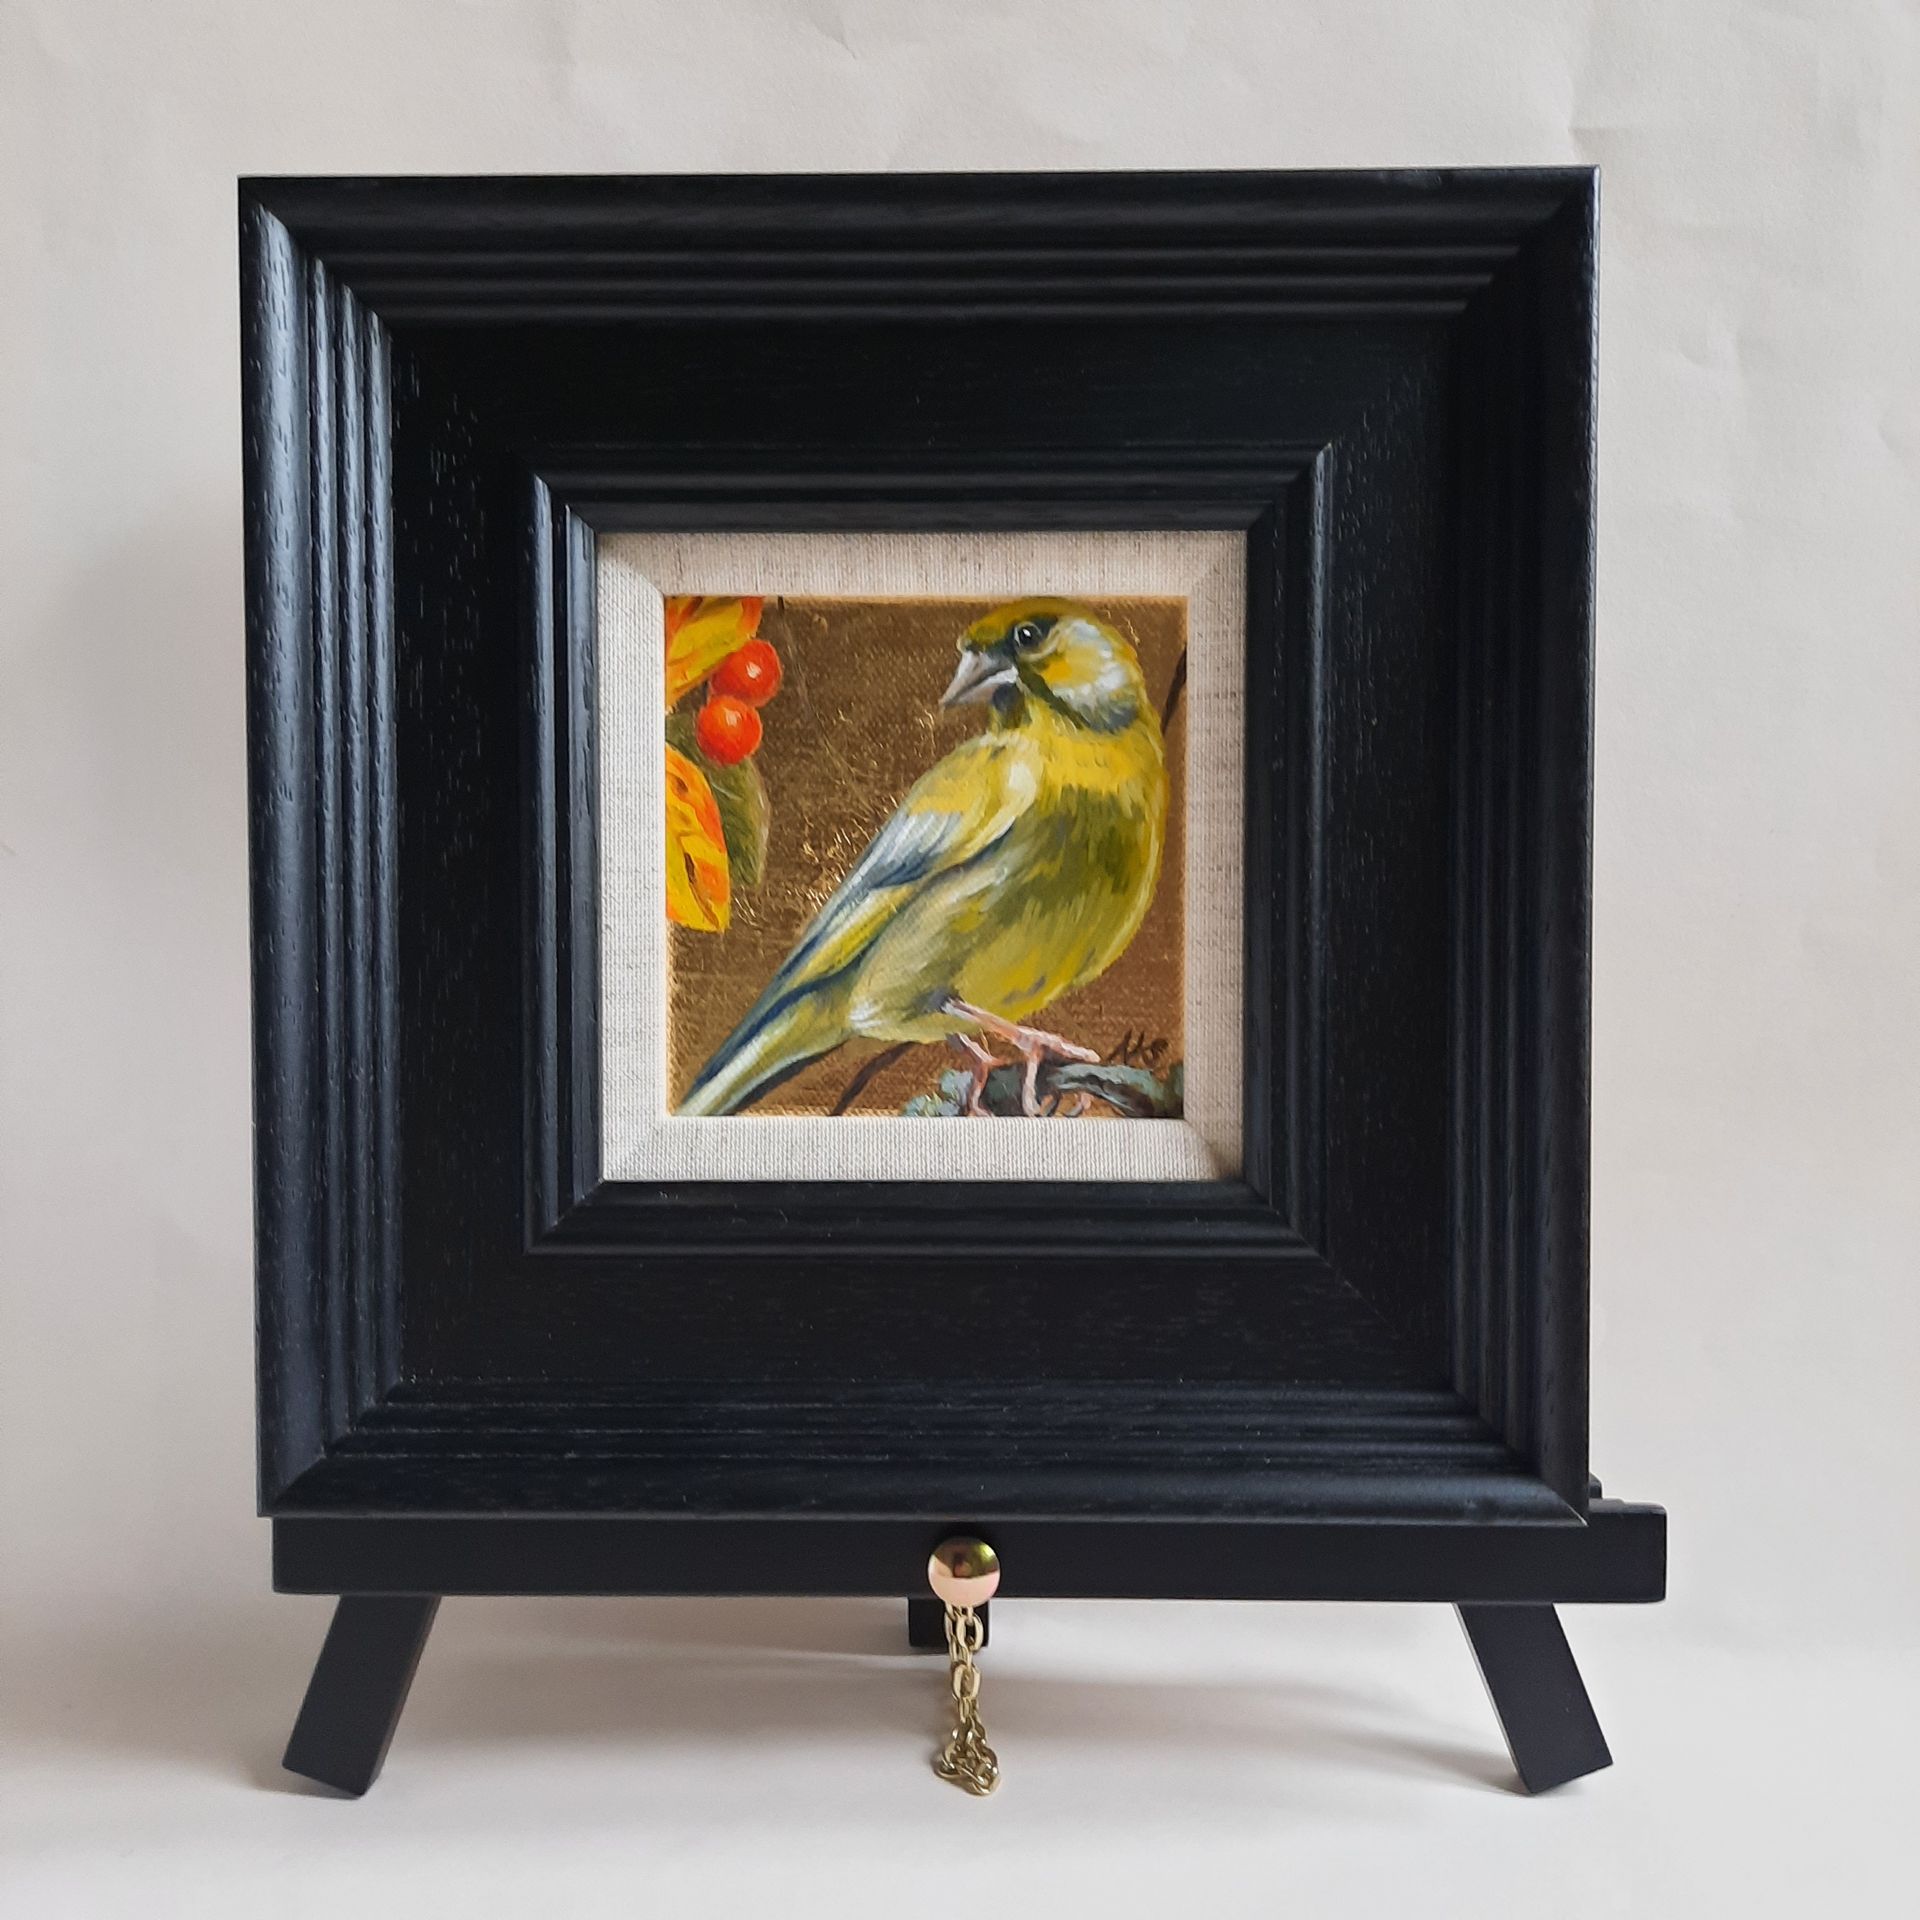 An oil painting of a Green Finch perched on a twig, with round, bright orange berries and autumnal leaves in the top left corner. The painting is on shiny gold leaf and is shown framed in a black frame on a black mini easel